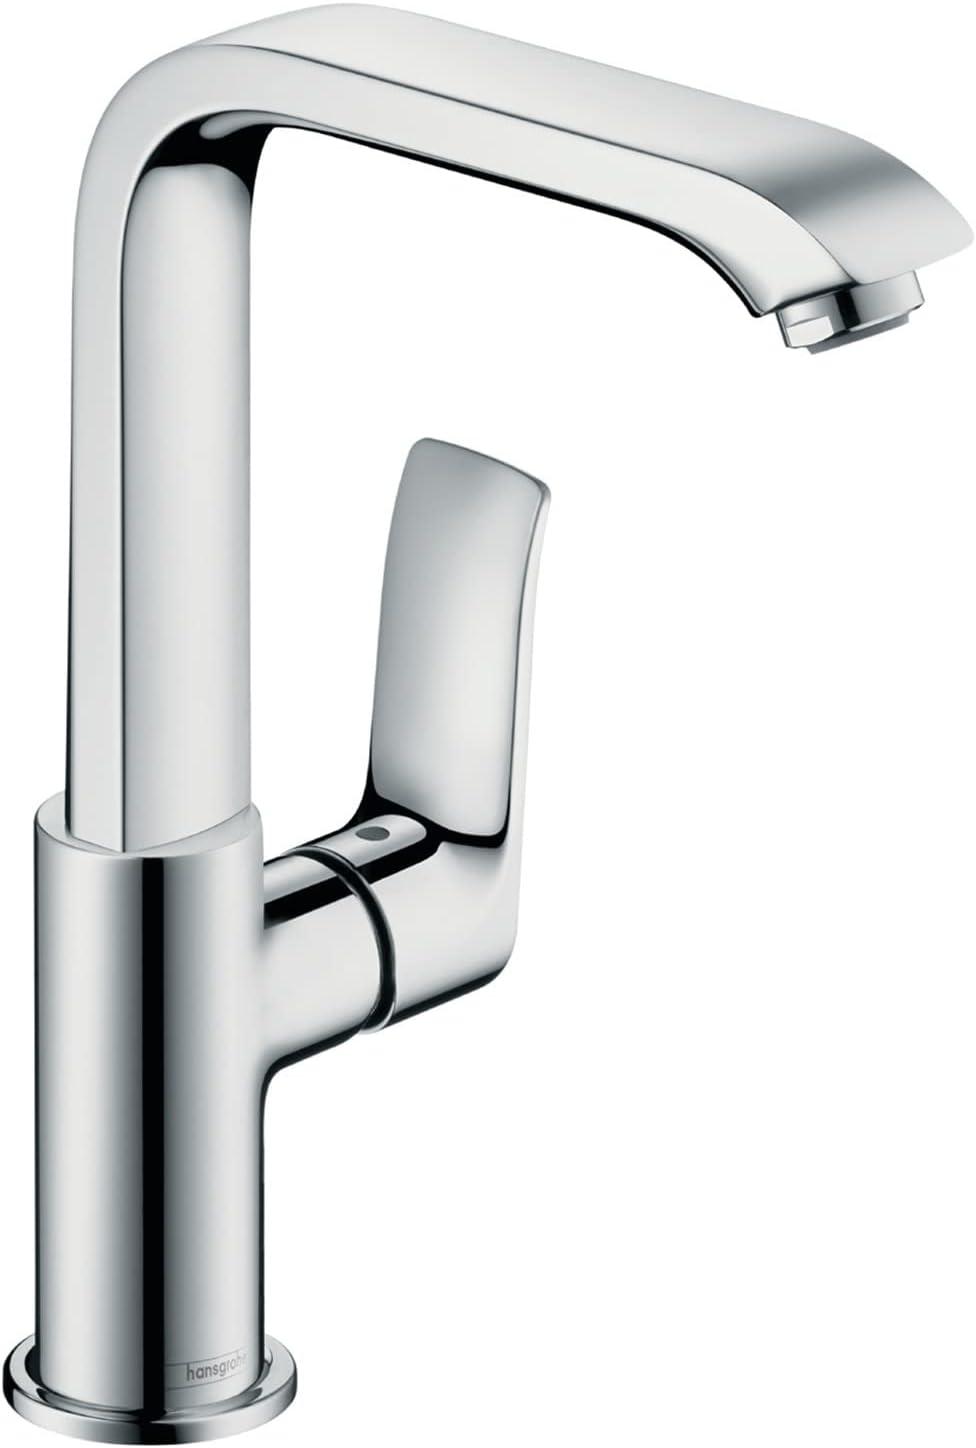 Modern Brushed Nickel Single Hole Vessel Faucet with Eco-Friendly Design